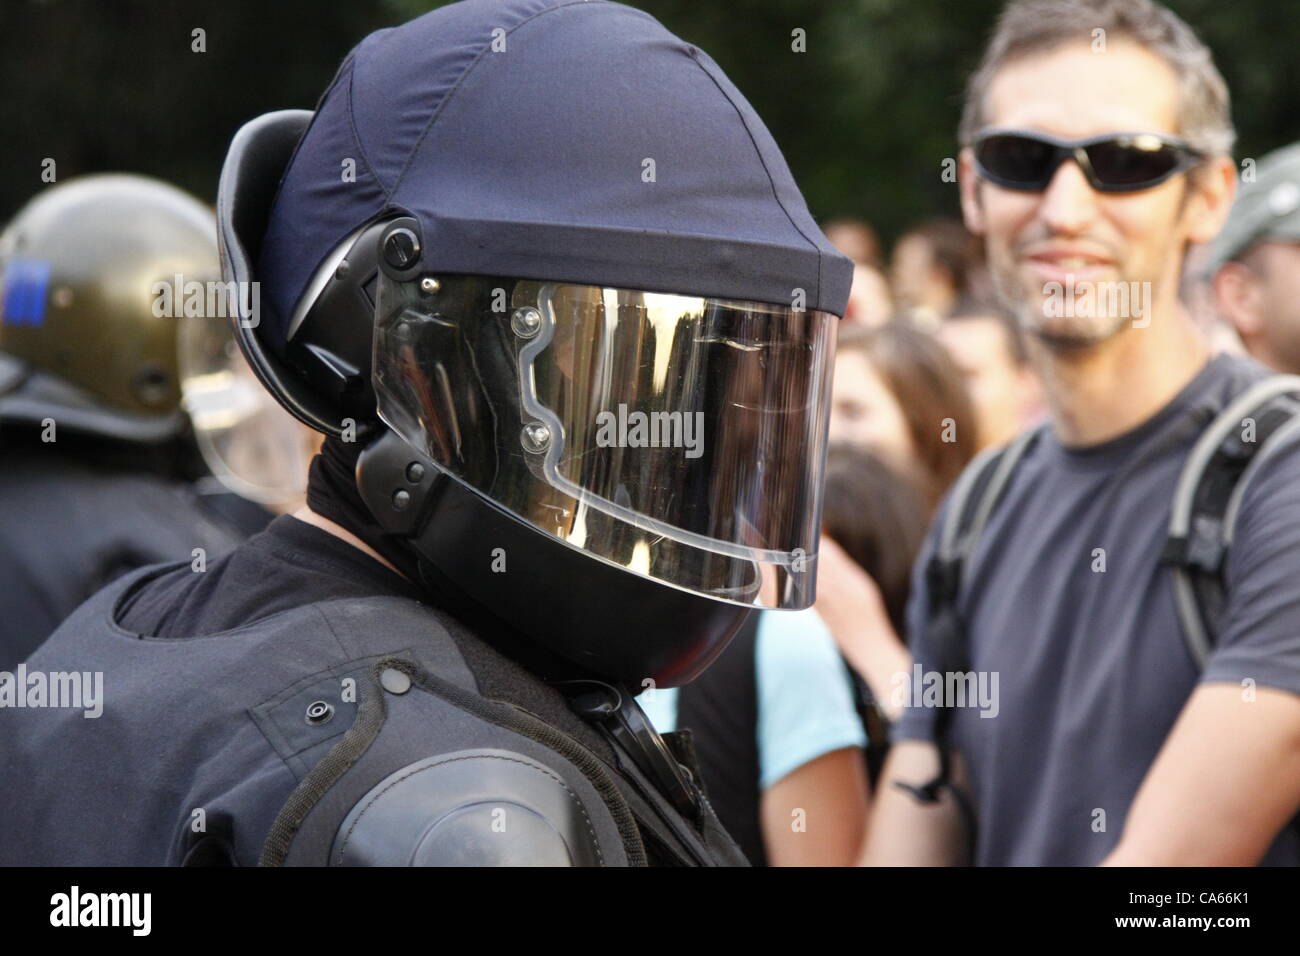 Policeman in full riot gear and smiling demonstrator during the anti-government rally in Sofia. Thousands protested the change in the Bulgarian Forrestry Act that allows cutting down trees without changing the status of the land first. Sofia, Bulgaria, 14/06/2012 Stock Photo